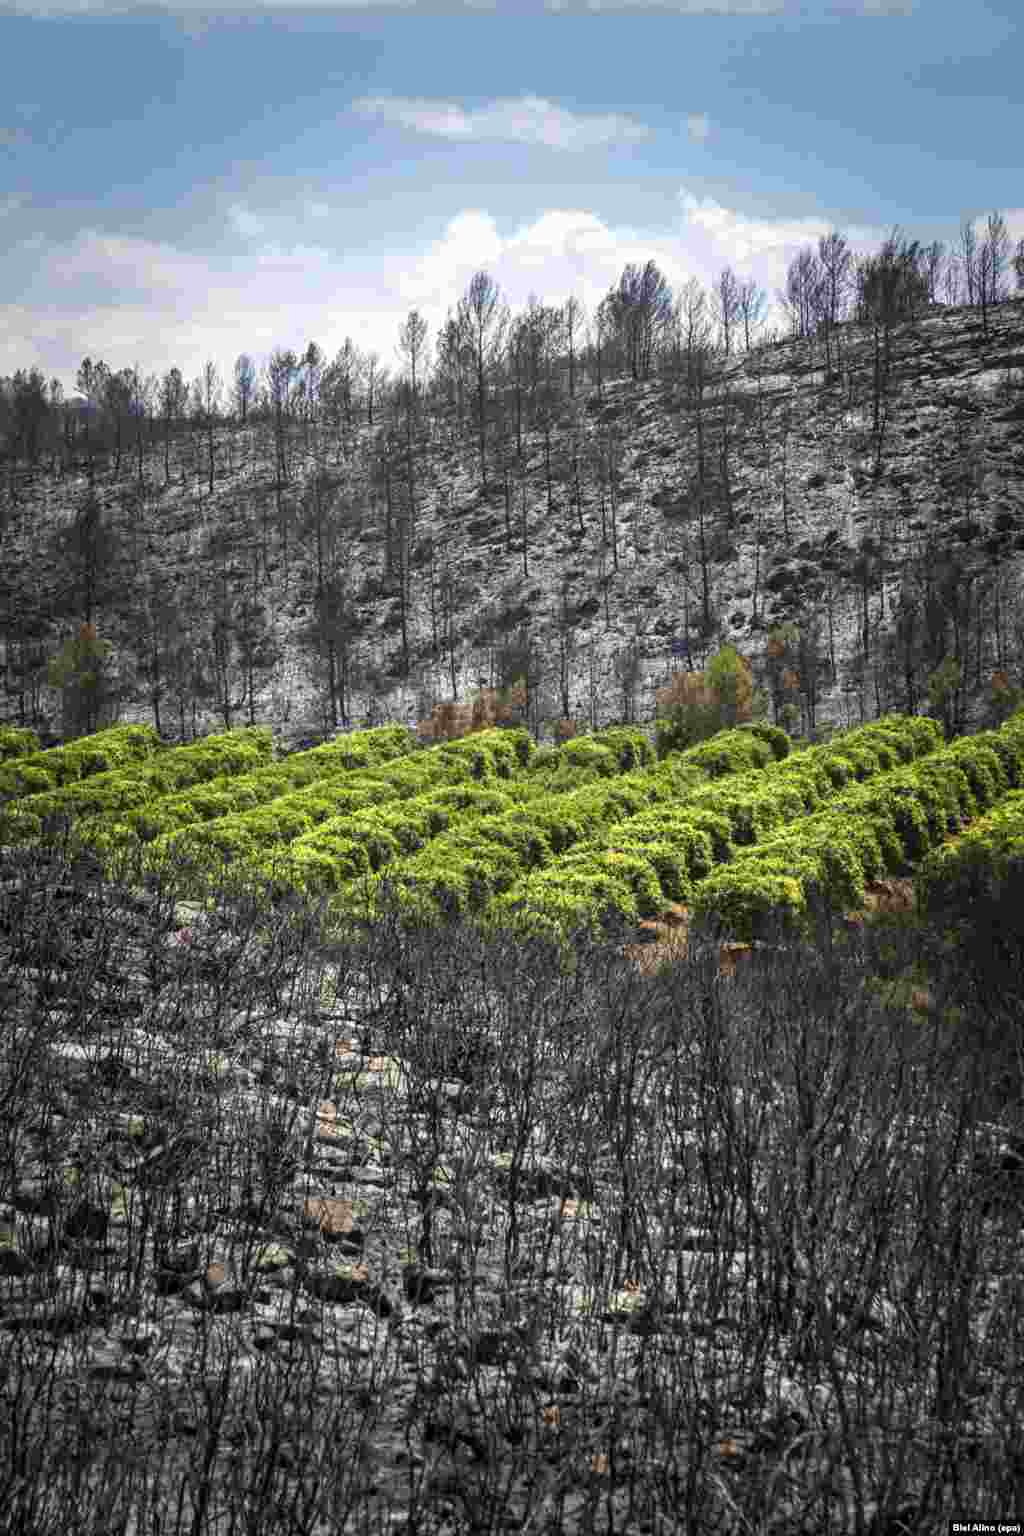 A general view of the burnt trees after a forest fire in Carcaixent, Valencia, Spain, June 18, 2016. Up to 1,600 hectares have already burnt in the forest fire at Carcaixent where nearby residents have been evacuated as some houses have been affected by the blaze.&nbsp;